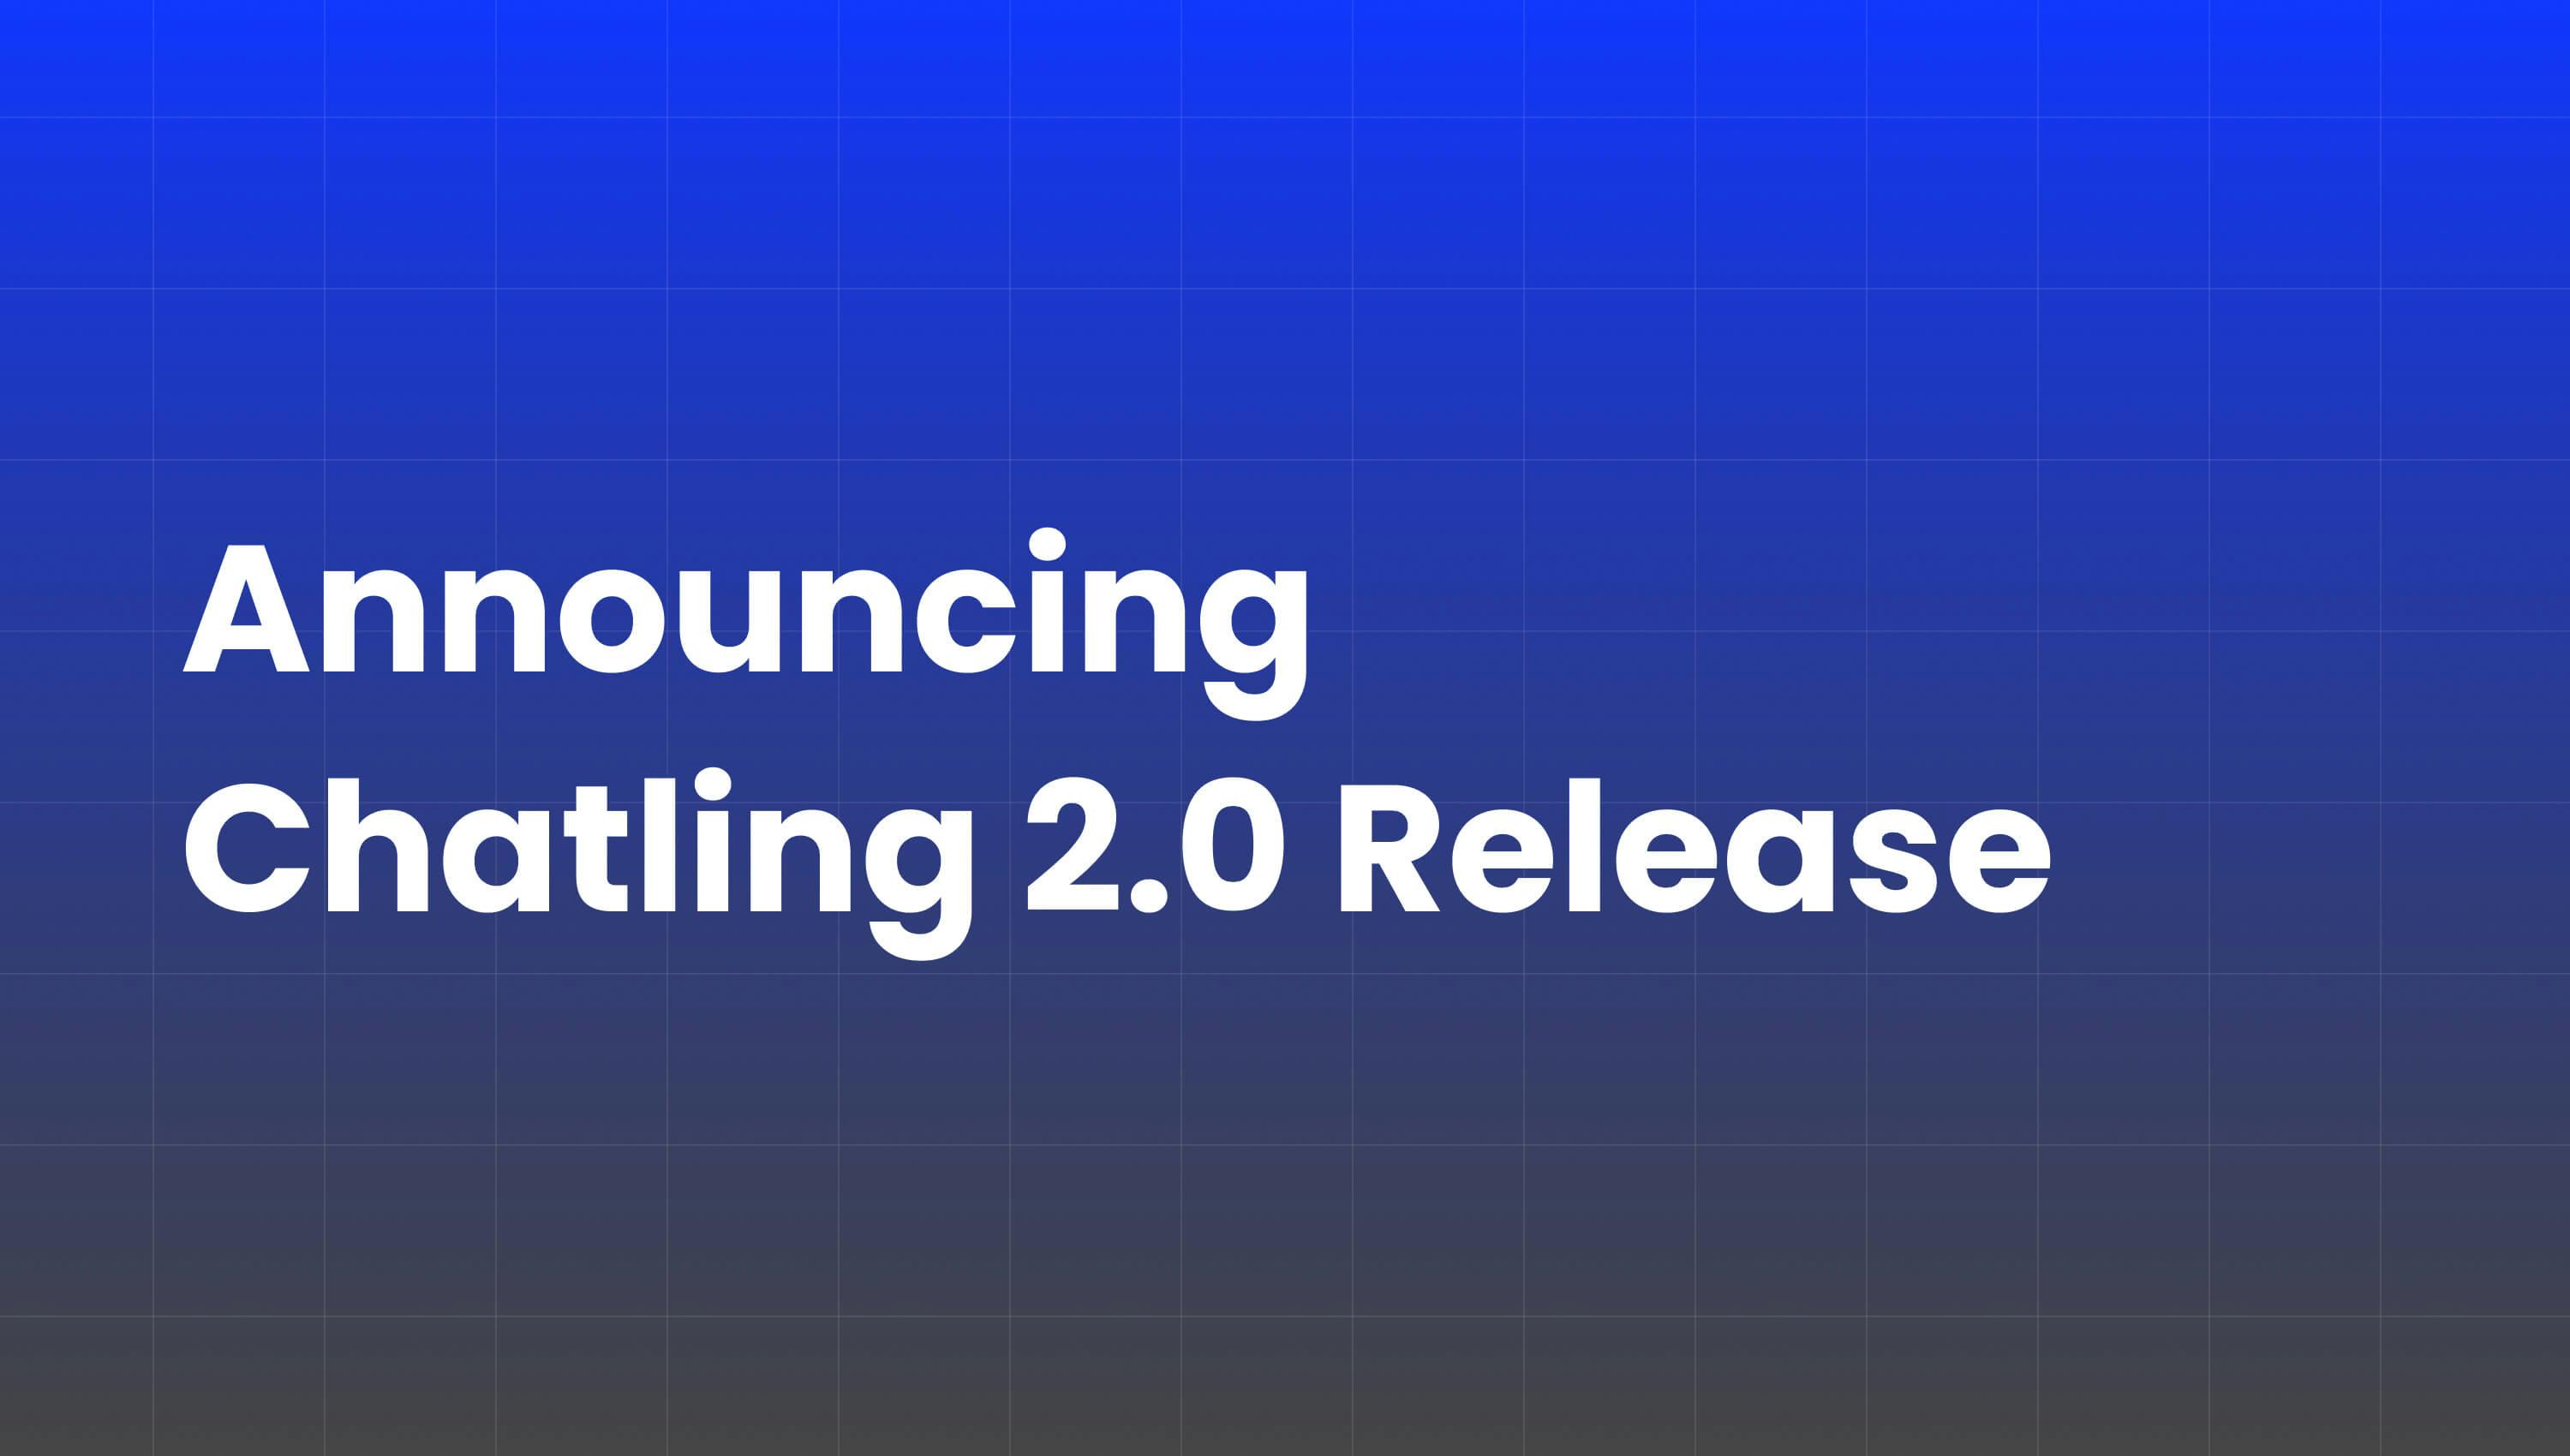 Announcing Chatling 2.0